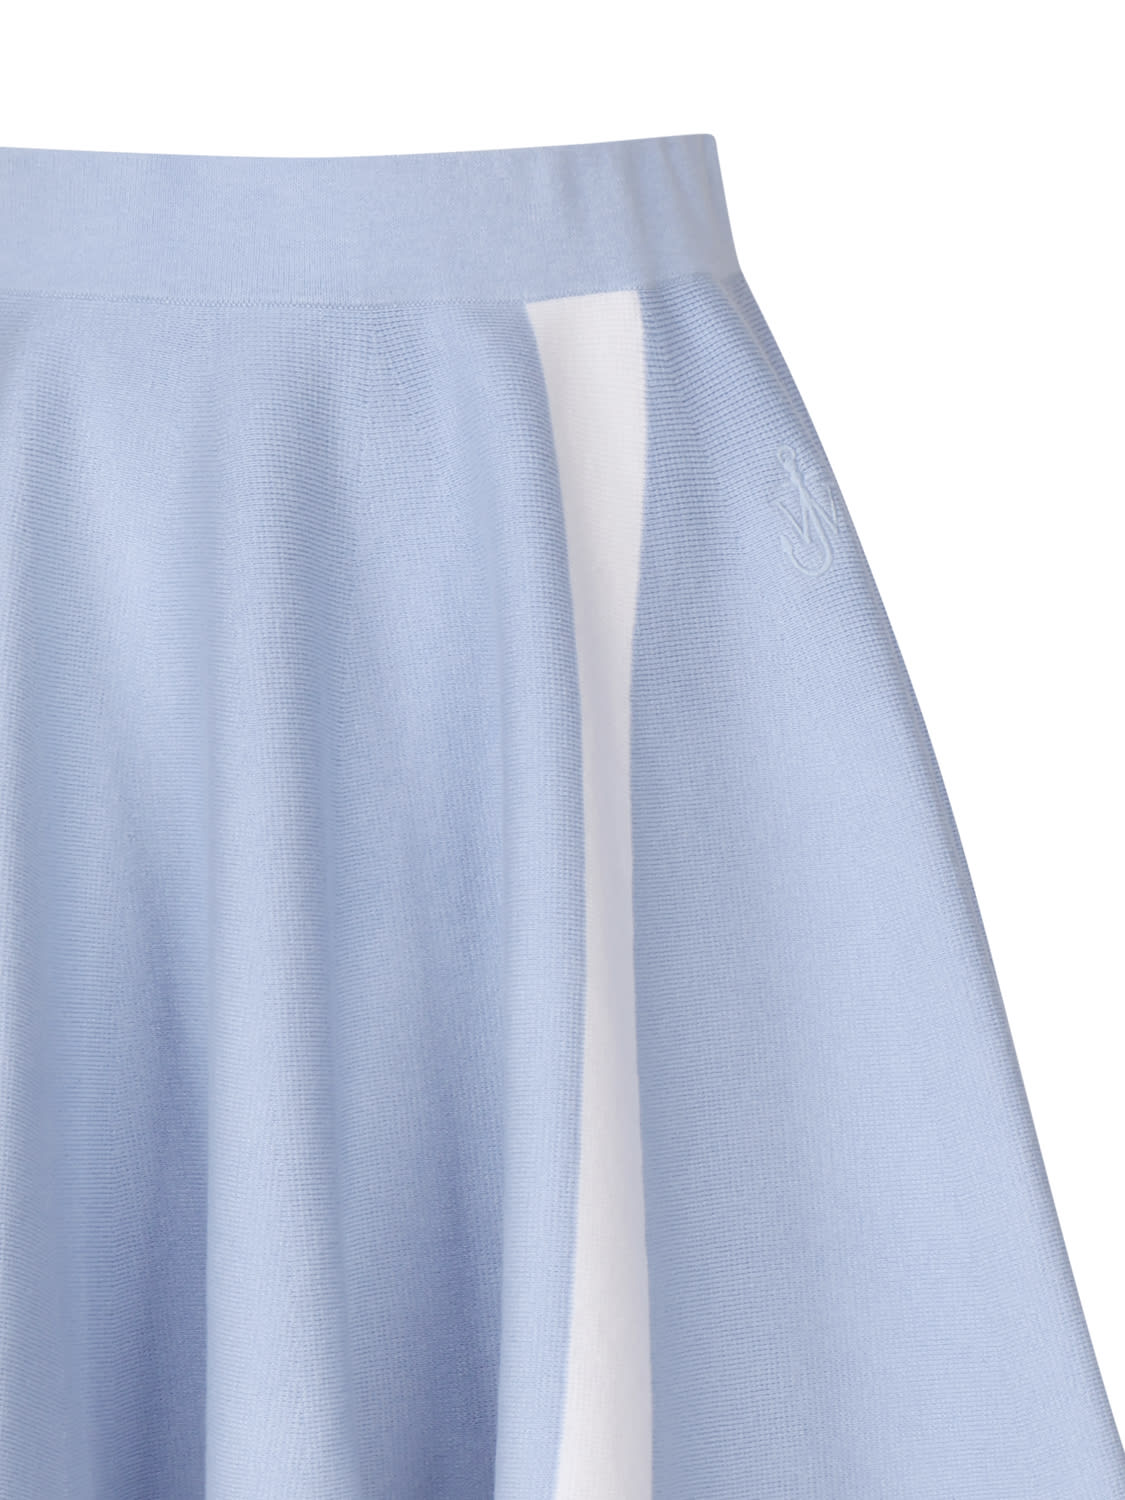 Shop Jw Anderson Flared Mini Skirt With Embroidery In Light Blue, White